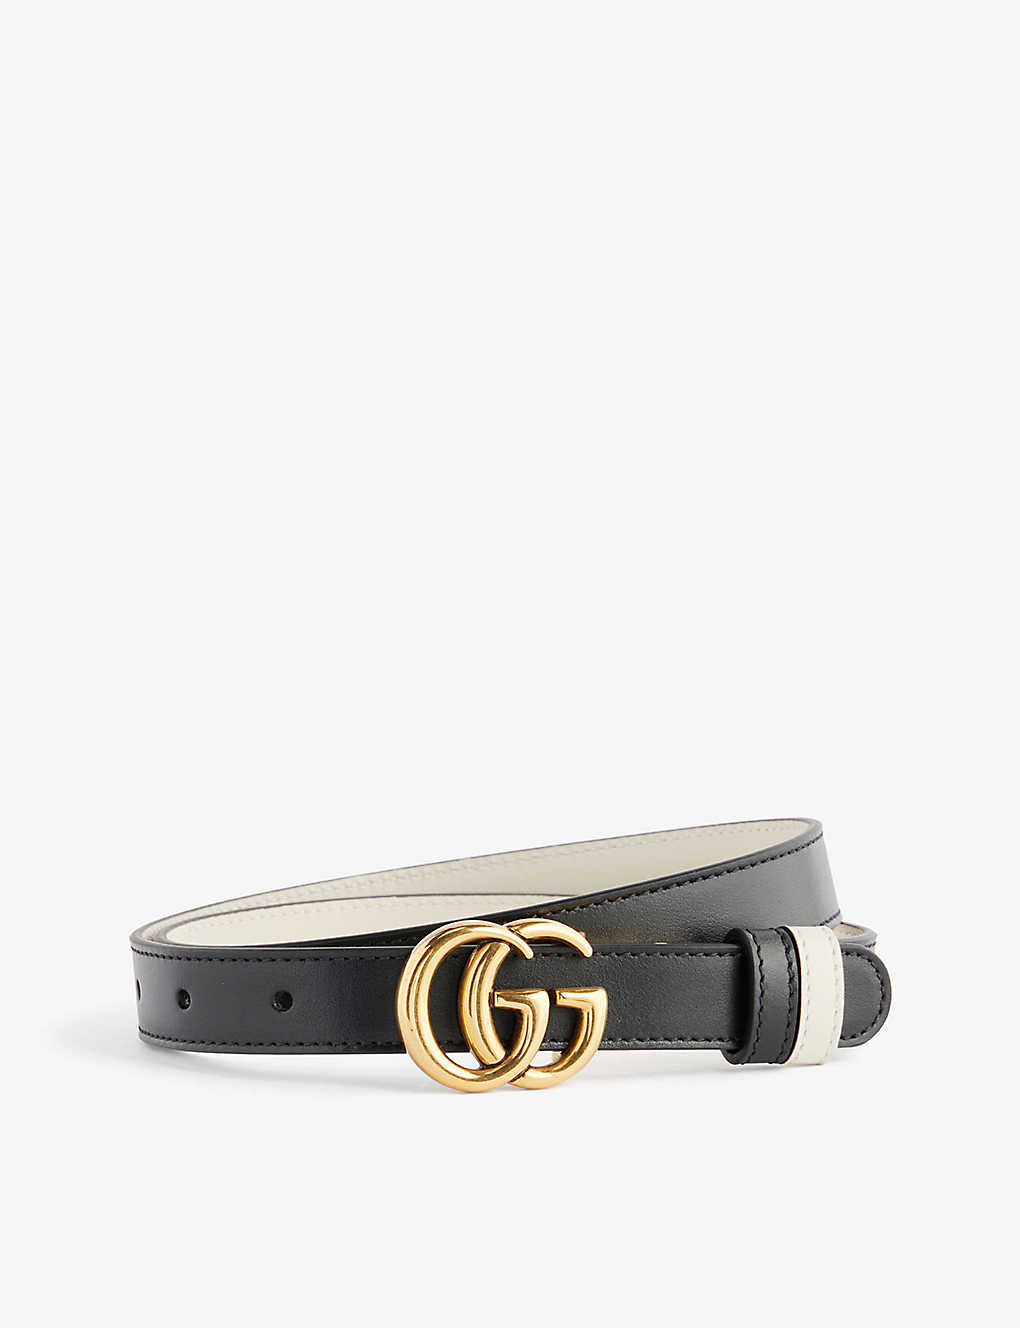 BVLGARI square buckle gold belt leather free shipping from japan